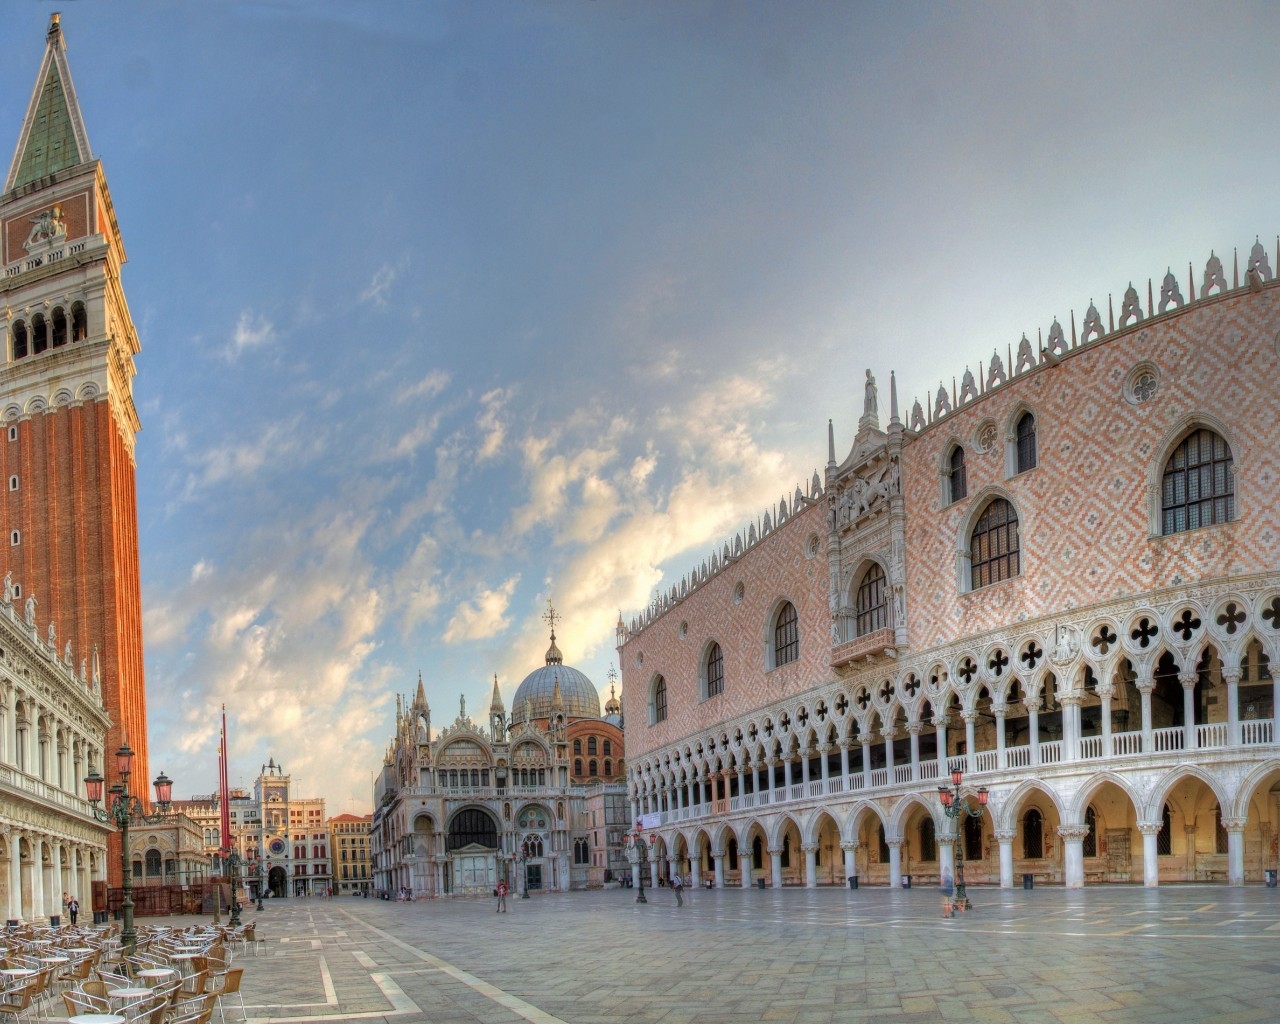 Piazza San Marco in Venice for 1280 x 1024 resolution